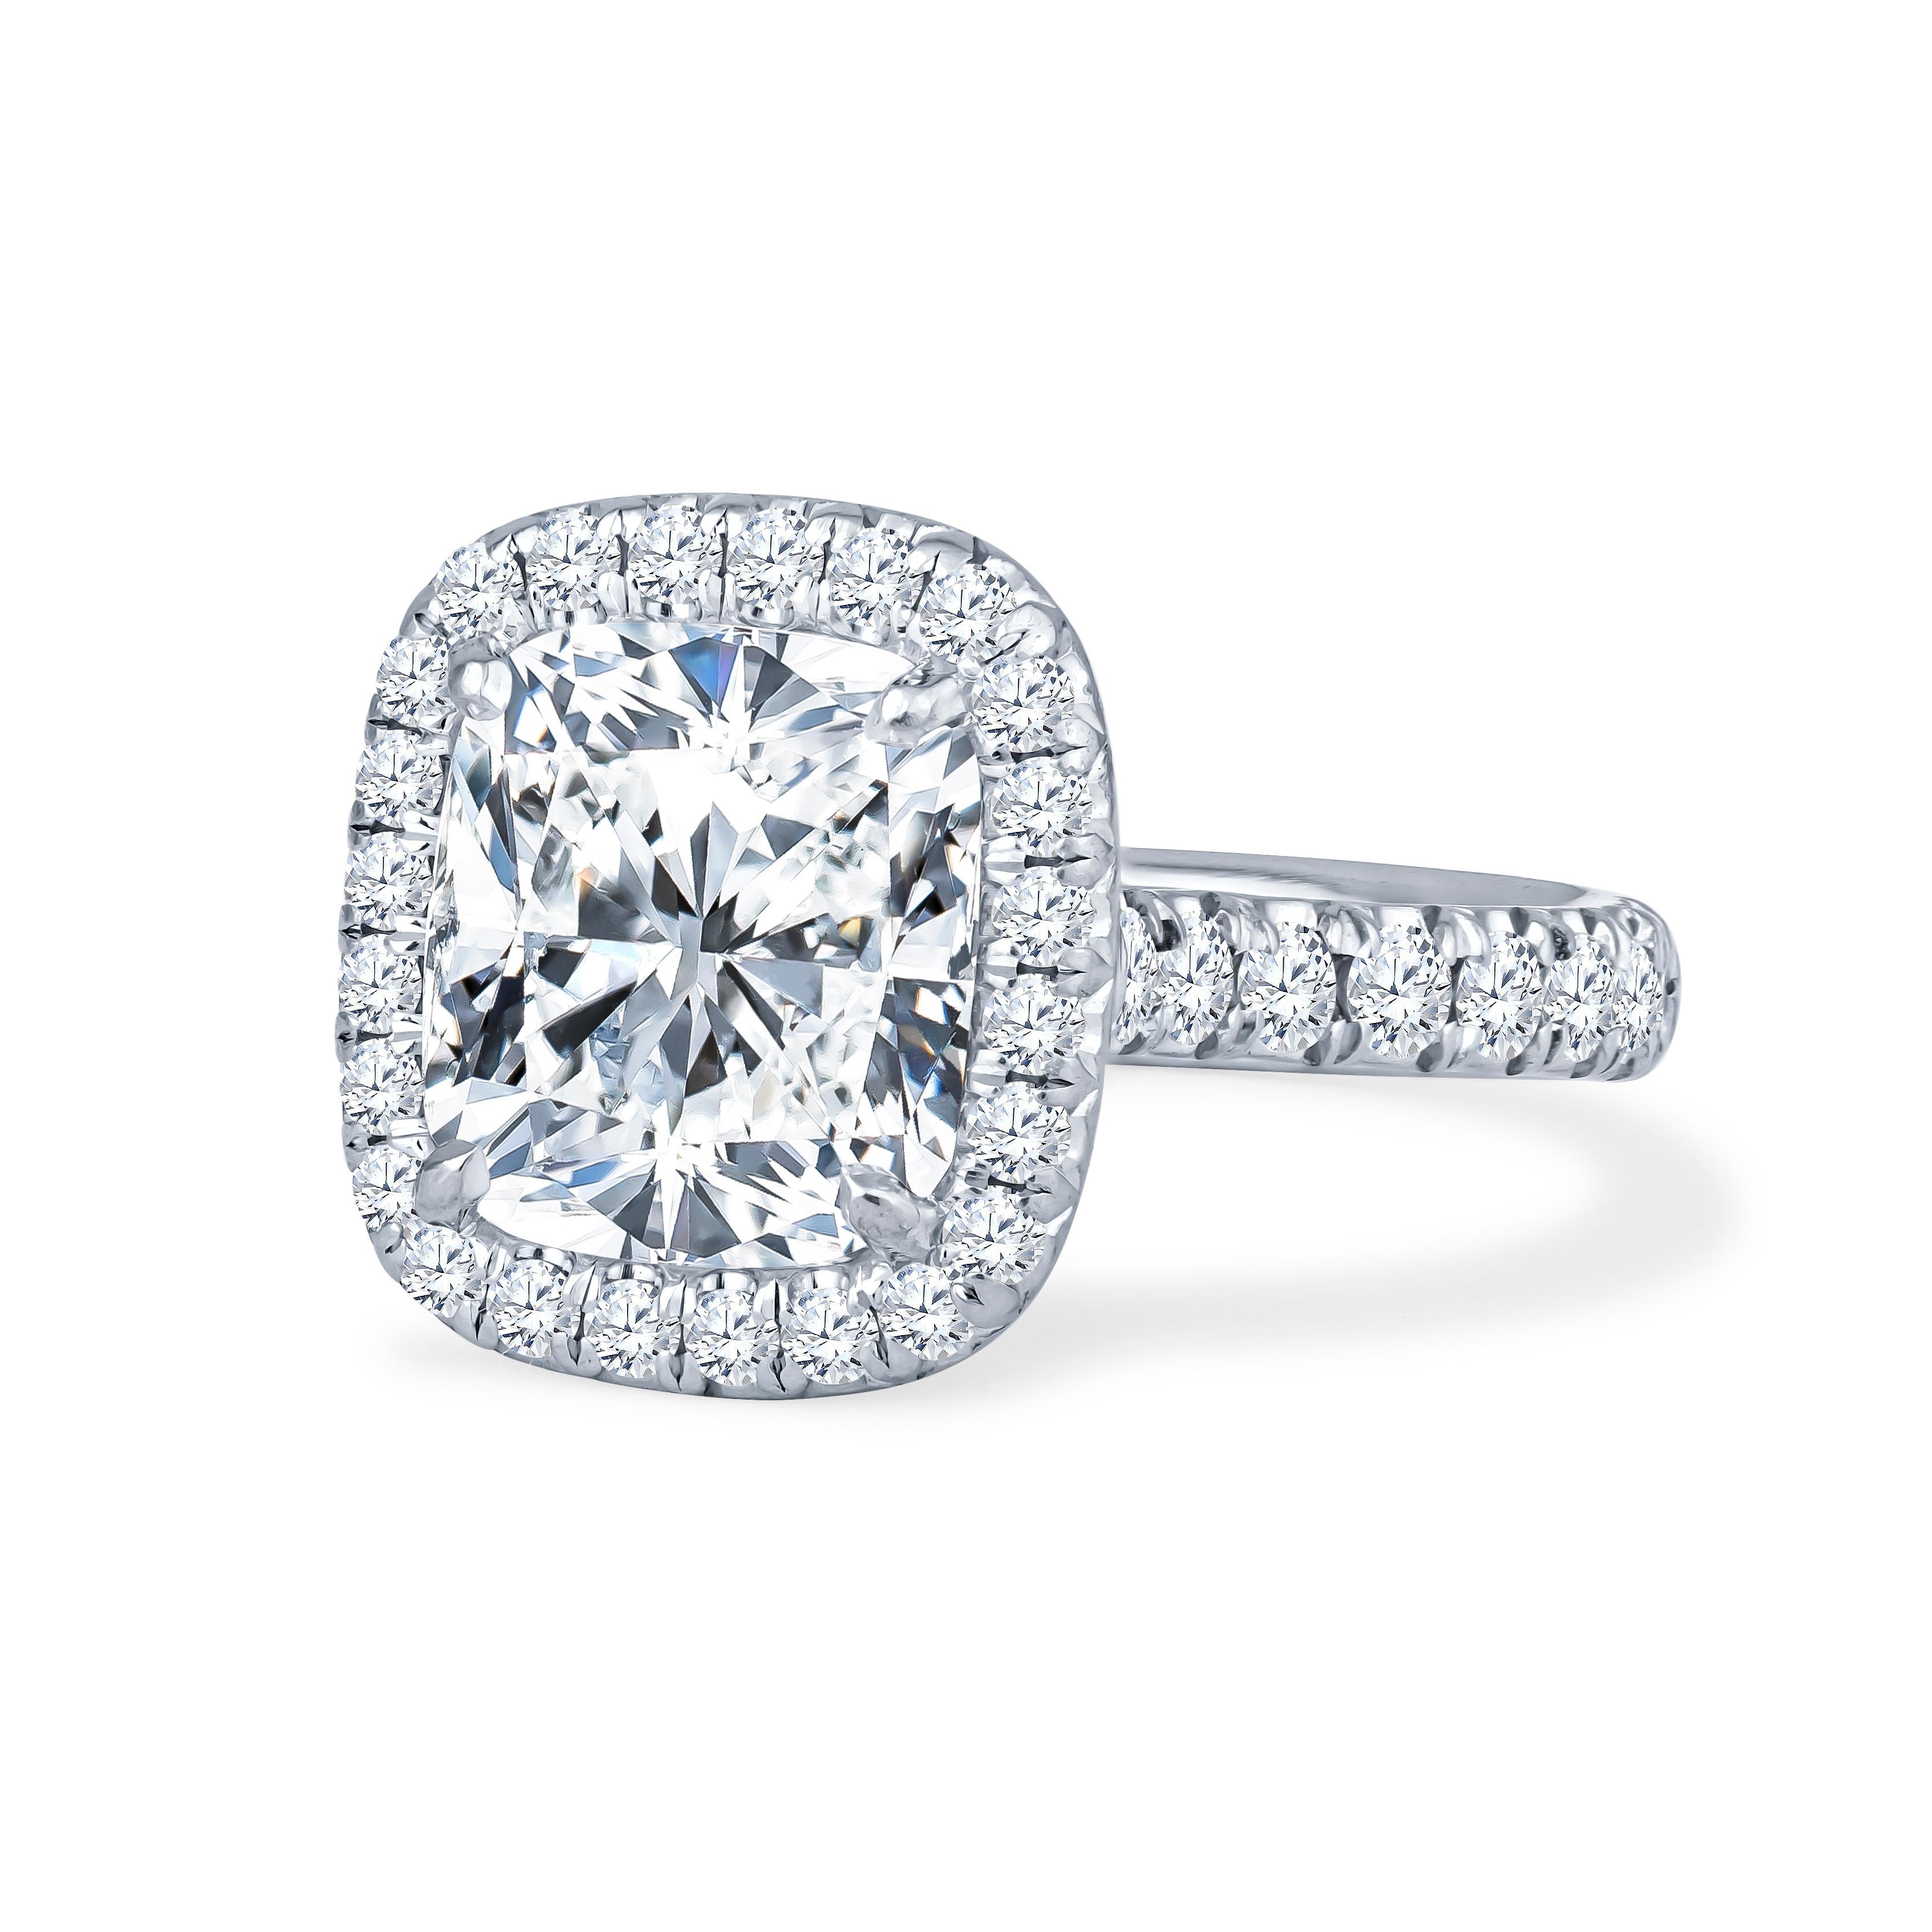 This breathtaking 4.18ct cushion cut natural diamond is set in a platinum halo engagement ring, with approximately 0.90ctw in surrounding diamonds. The ring is a size 6.25 but can be resized upon request. The diamond is GIA certified (Report